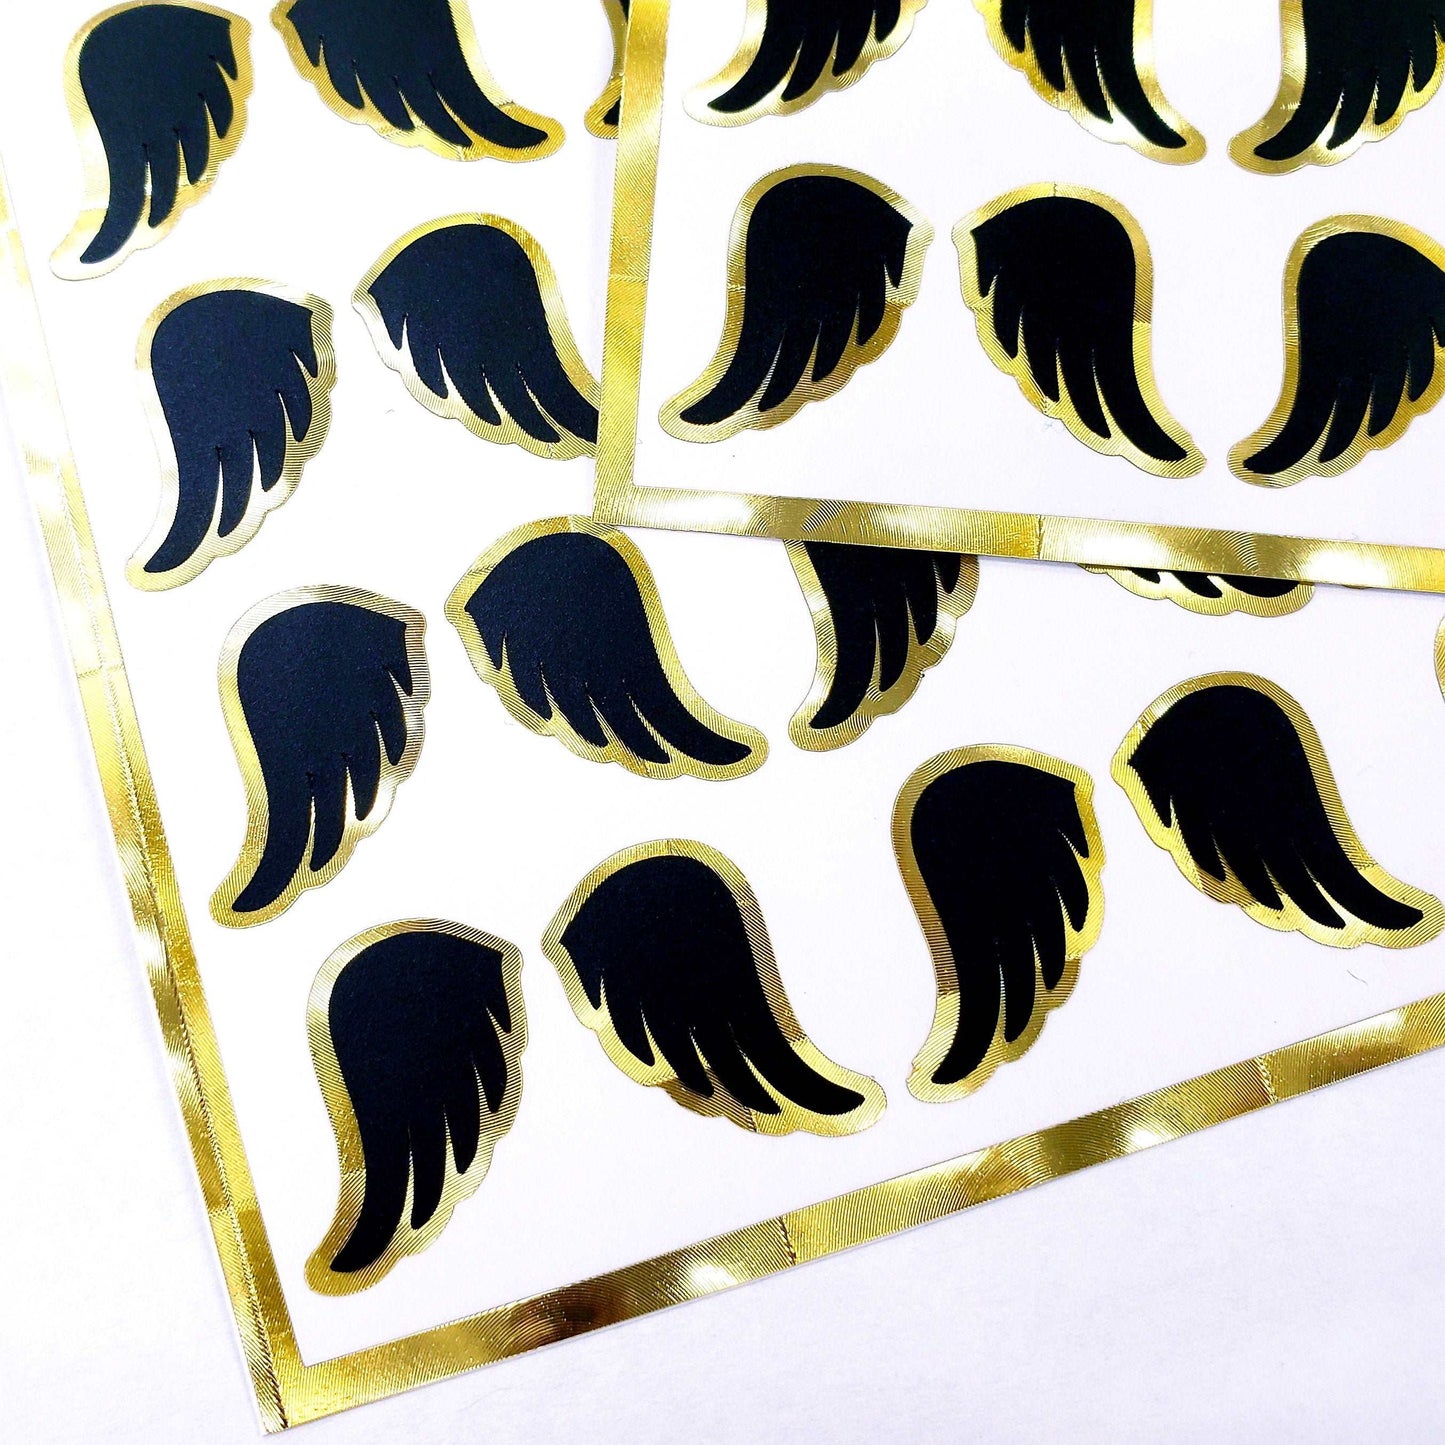 Black Angel Wing Stickers, set of 42 black and gold wing stickers for invitations, envelopes, memorial cards, planners, journals and crafts.